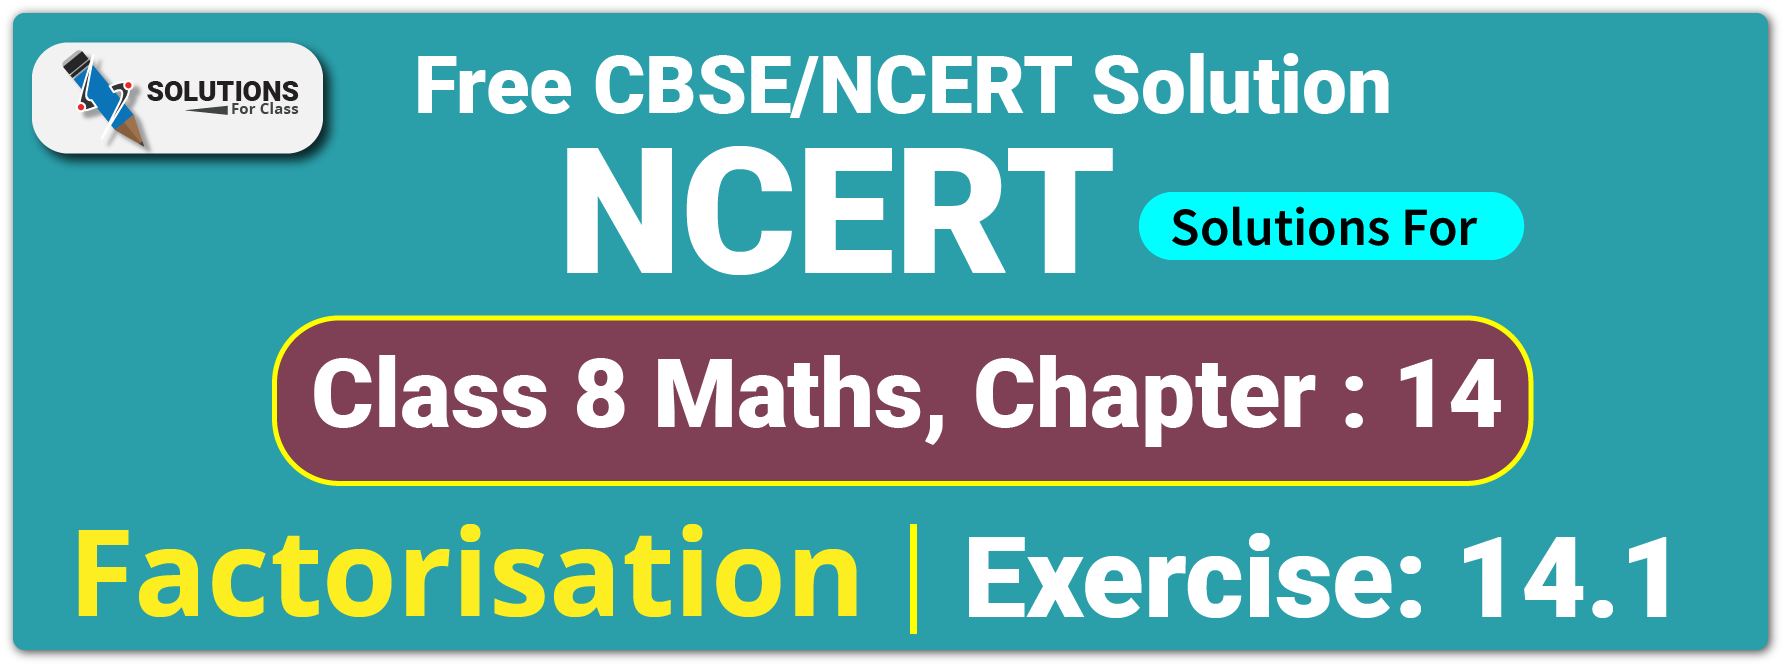 NCERT Solutions For Class 8 Chapter 14, Factorisation, Exercise14.1